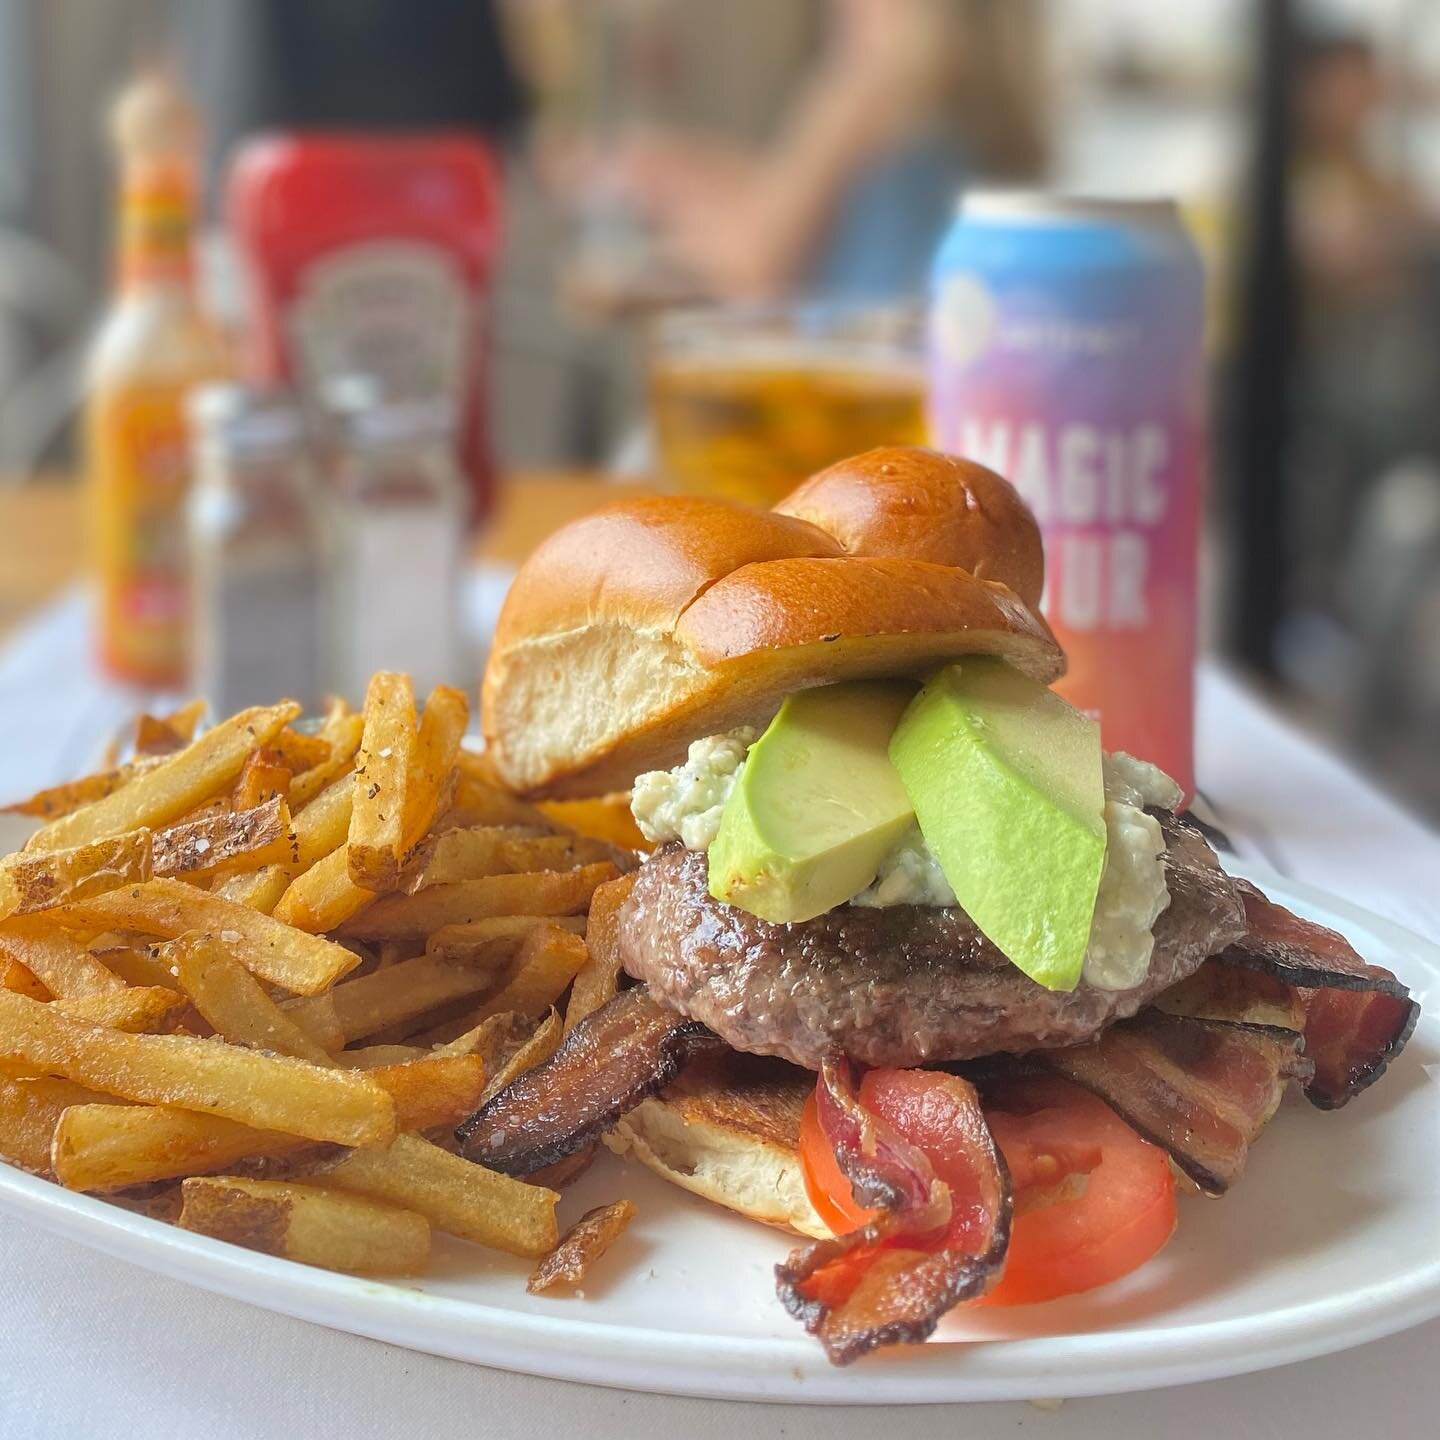 Burgers were  made for summer nights like this. 

Try our black &amp; blue burger served with hand cut french fries. Pair this juicy burger with an ice cold beer (or two) from our  local beer list.
#burger #eatlocal #bluecheeseburger